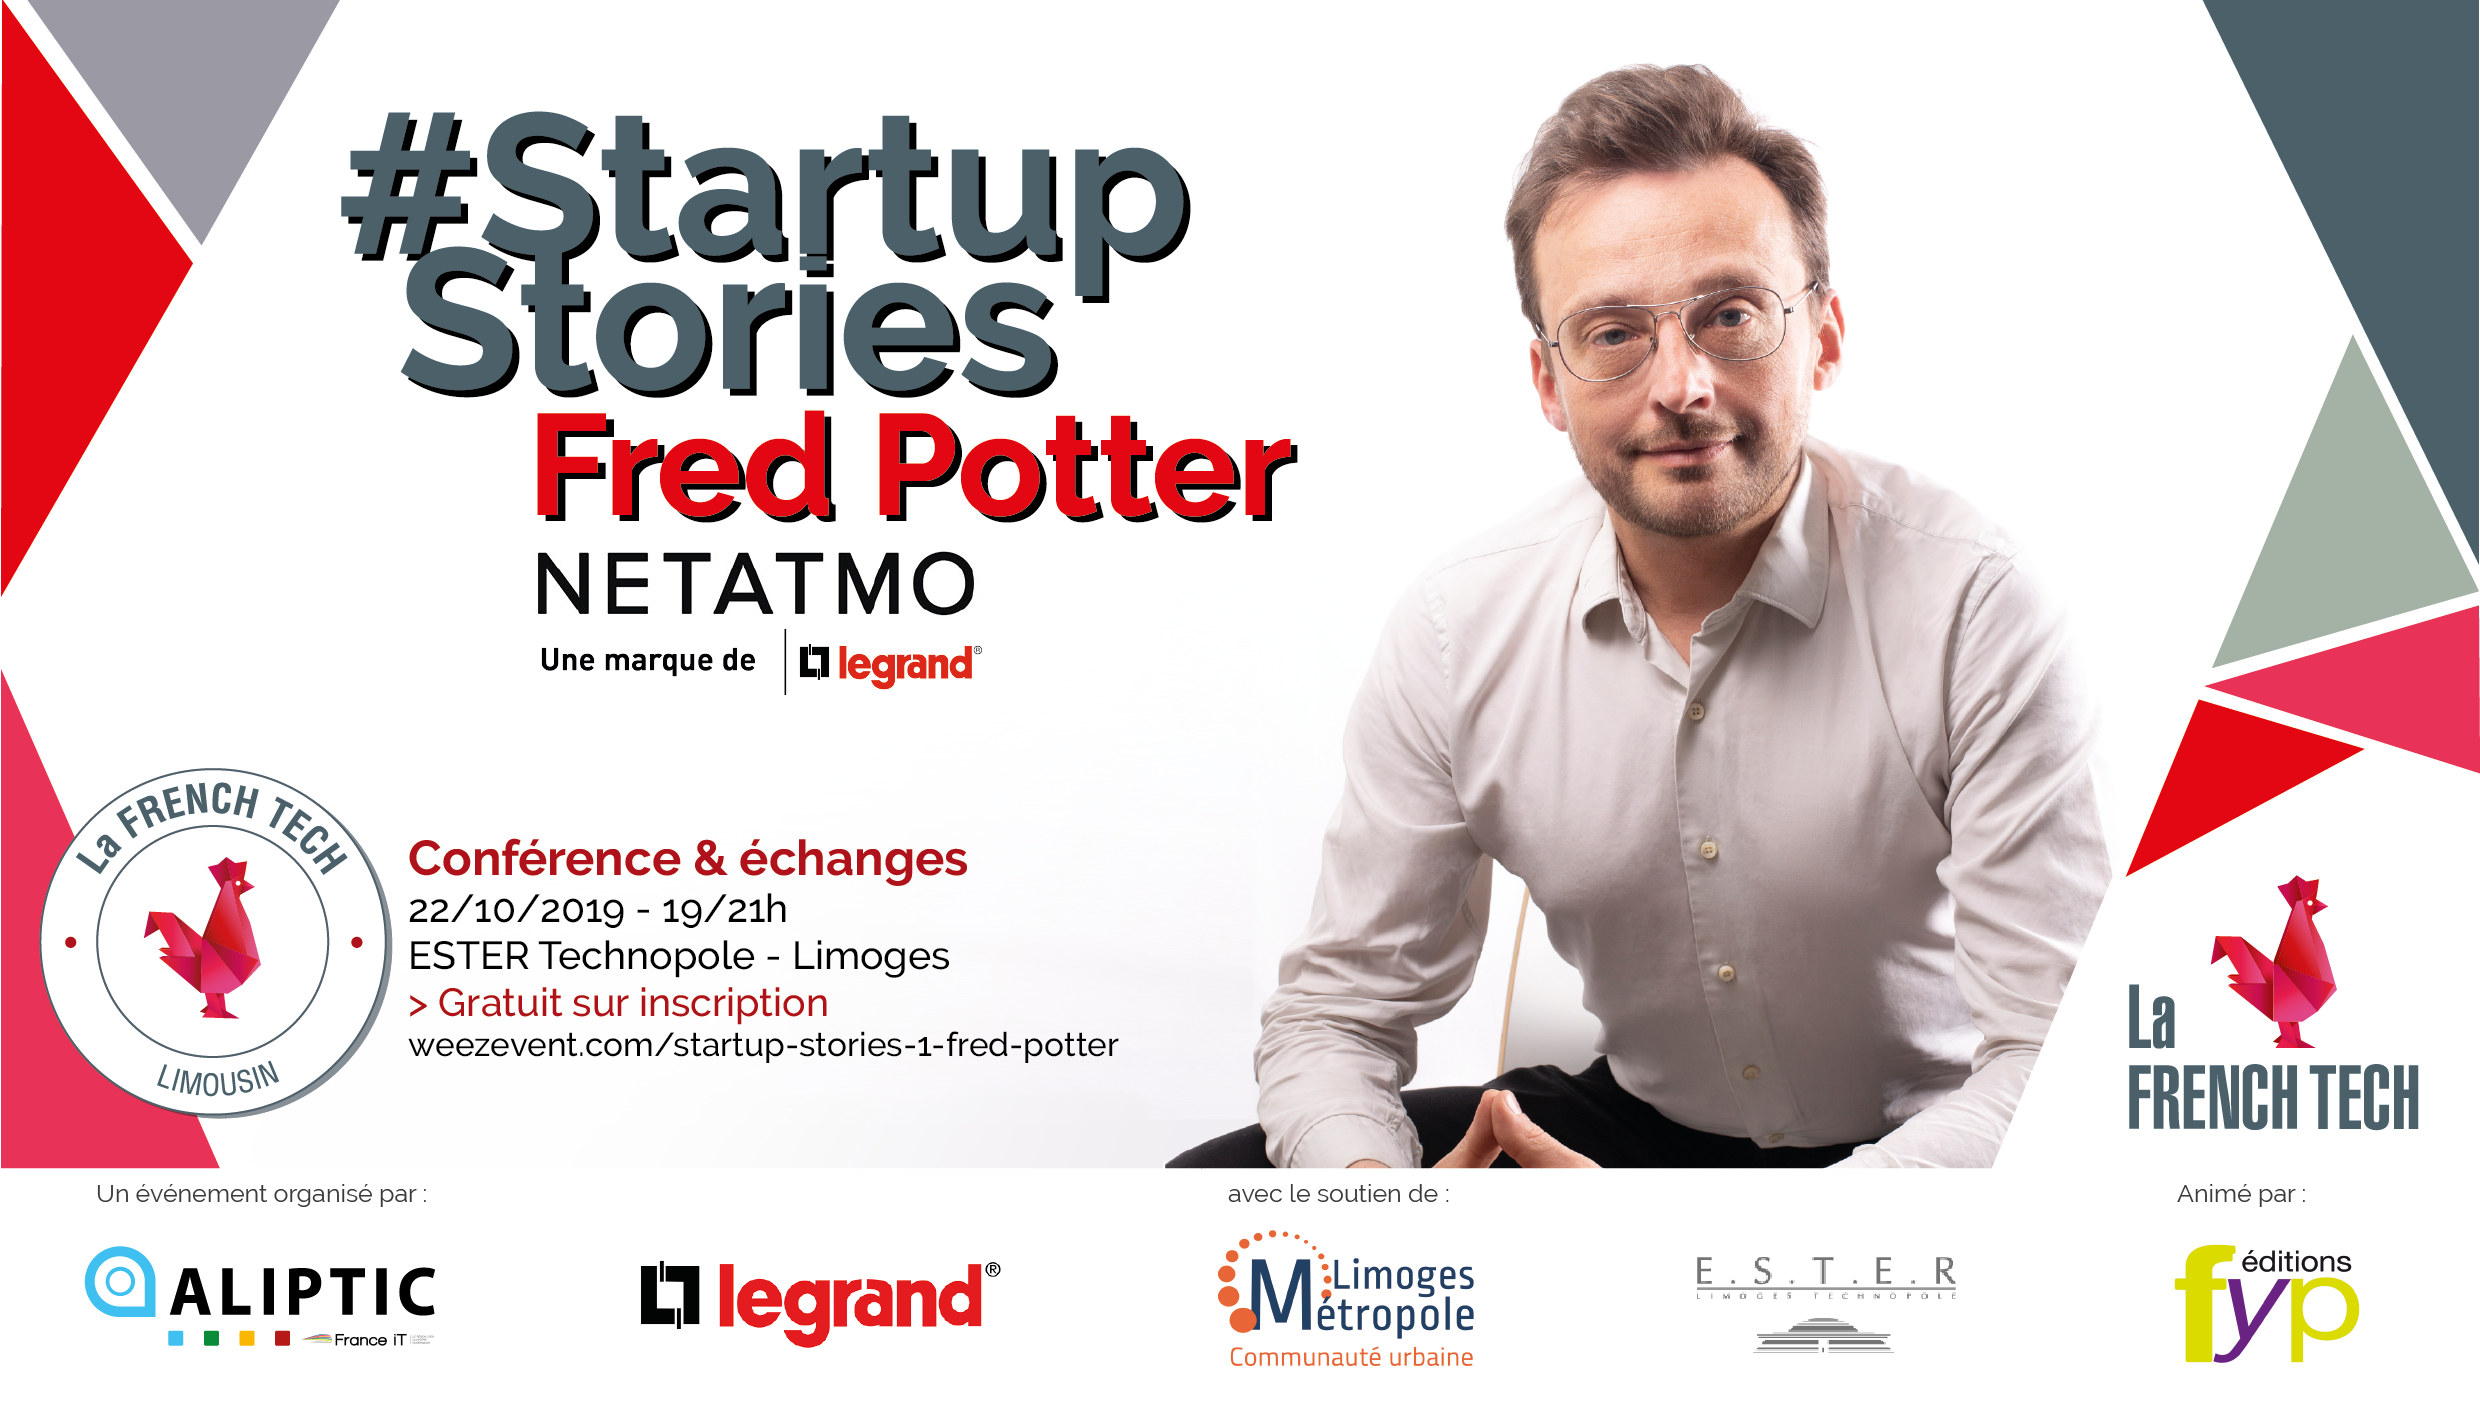  Startup Stories #1 - Fred Potter 